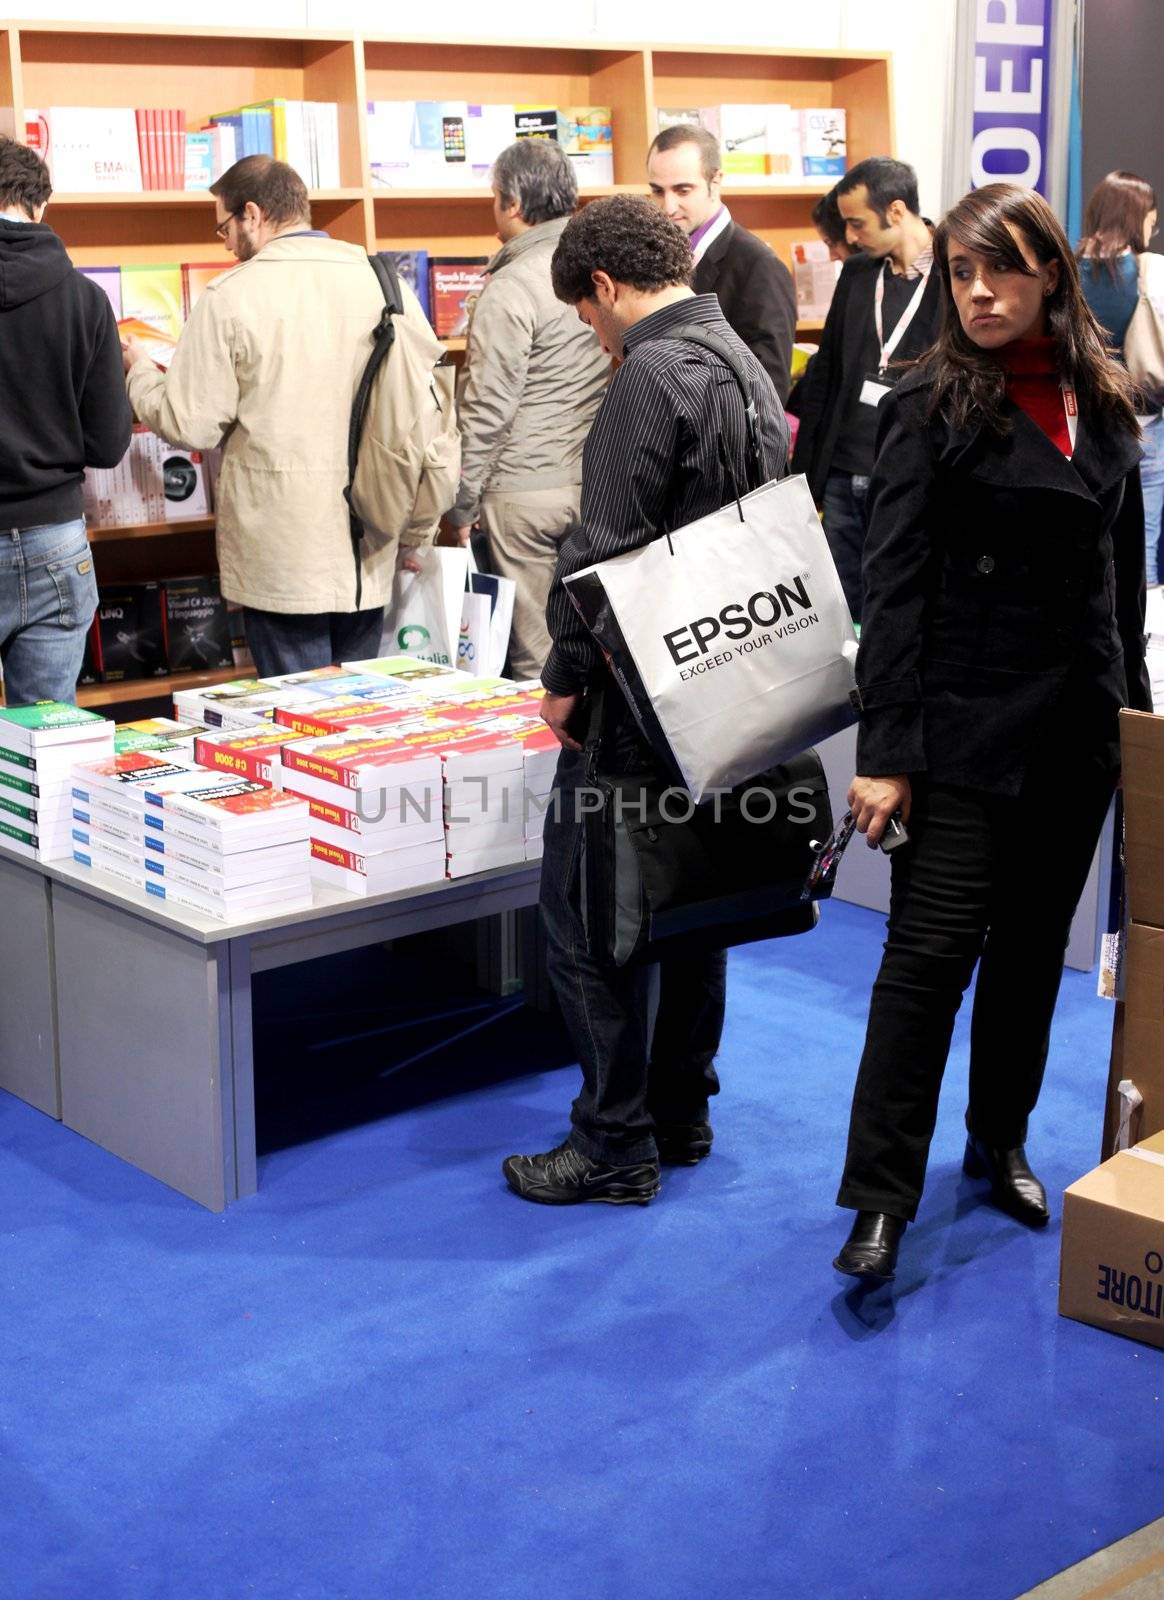 People looking for books at Smau, national fair of business intelligence and information technology October 21, 2009 in Milan, Italy.